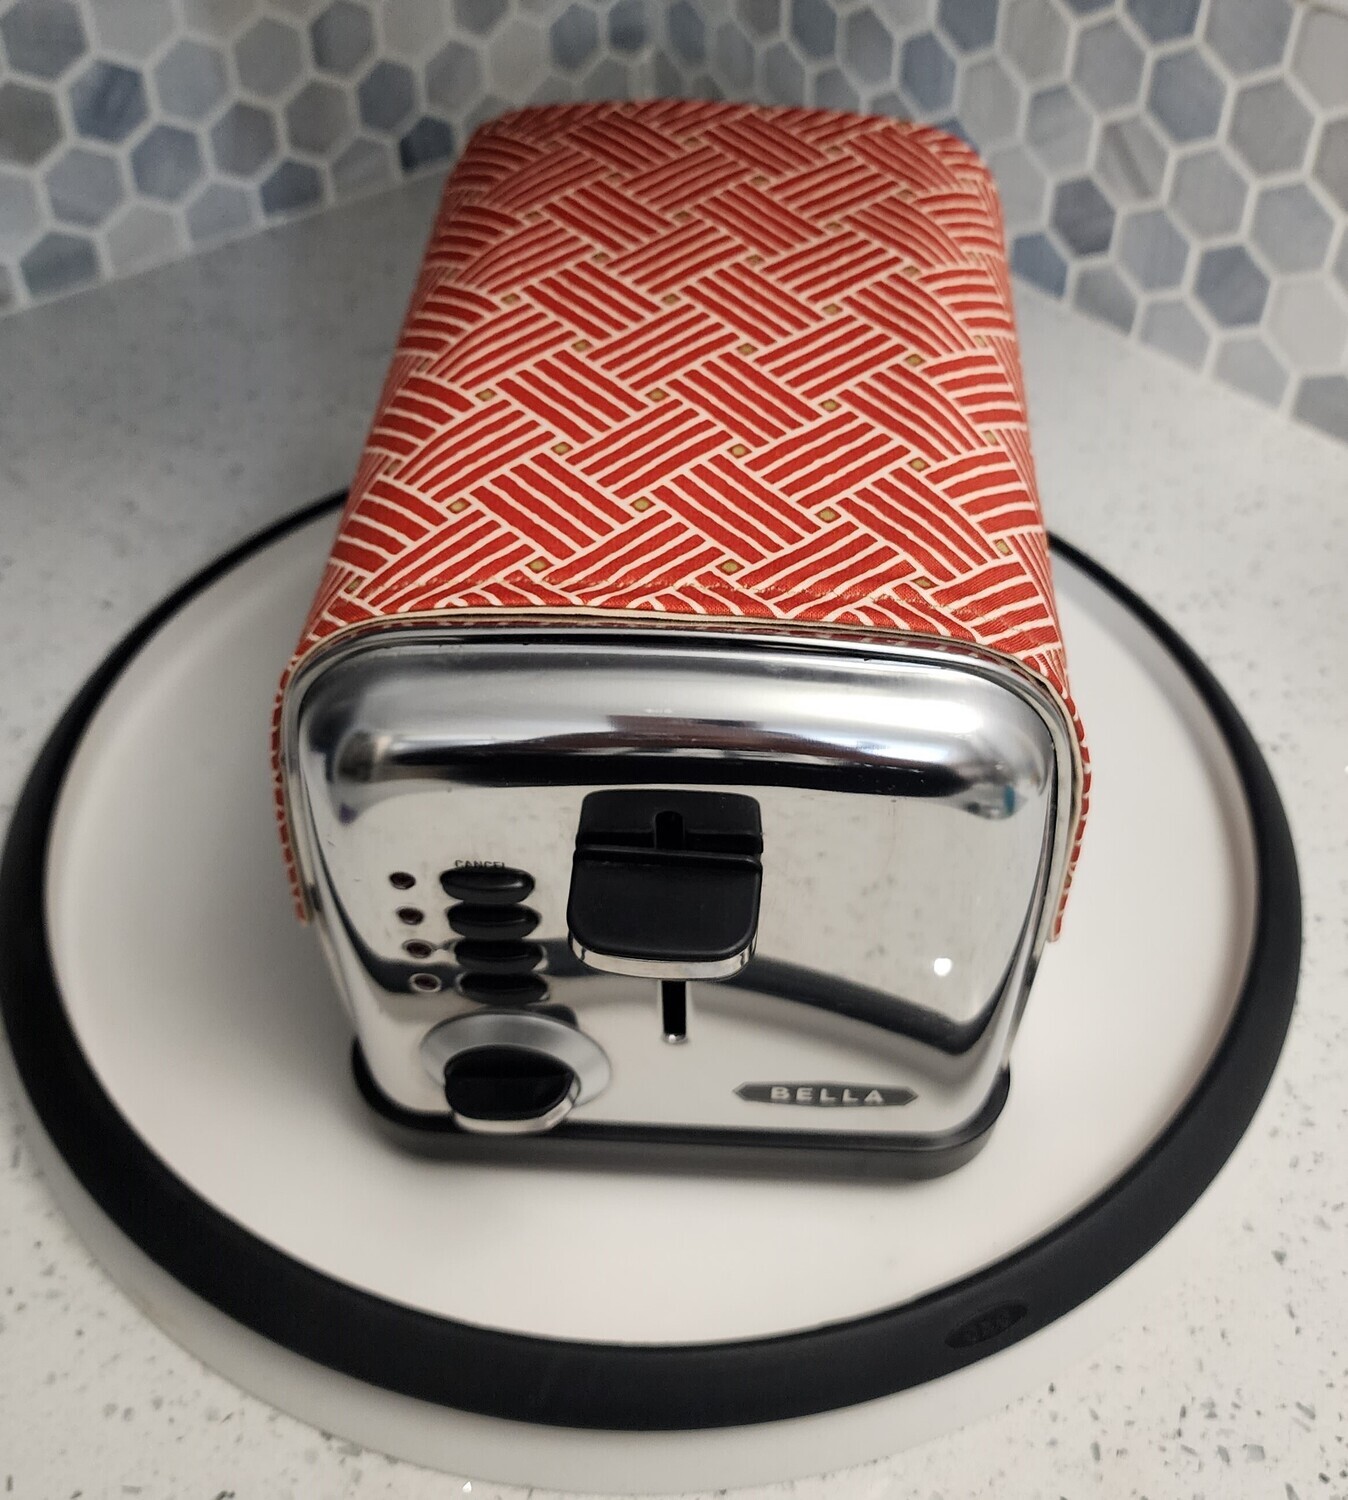 Two Slice Rectangular Toaster Cover - It's Magnetic